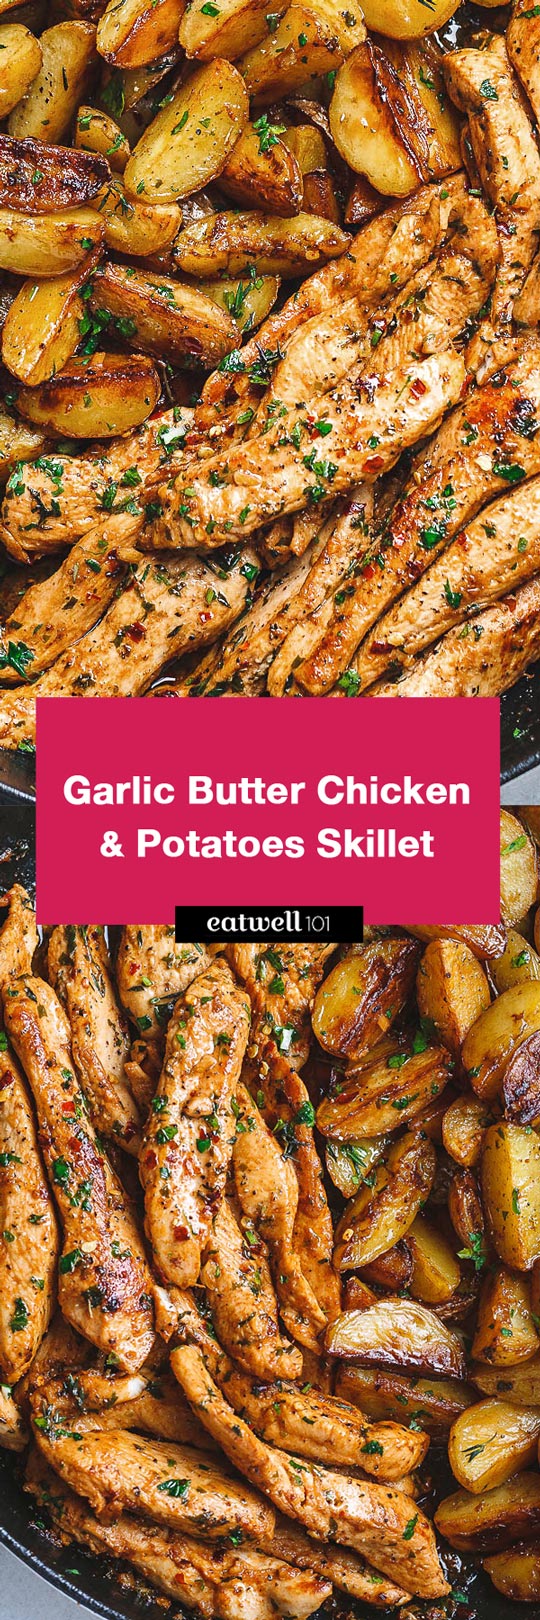 Garlic Butter Chicken and Potatoes Skillet - #eatwell101 #recipe One skillet. This chicken recipe is pretty much the easiest and tastiest  dinner for any weeknight! #Garlic #Butter #Chicken  #Potatoes #Dinner 